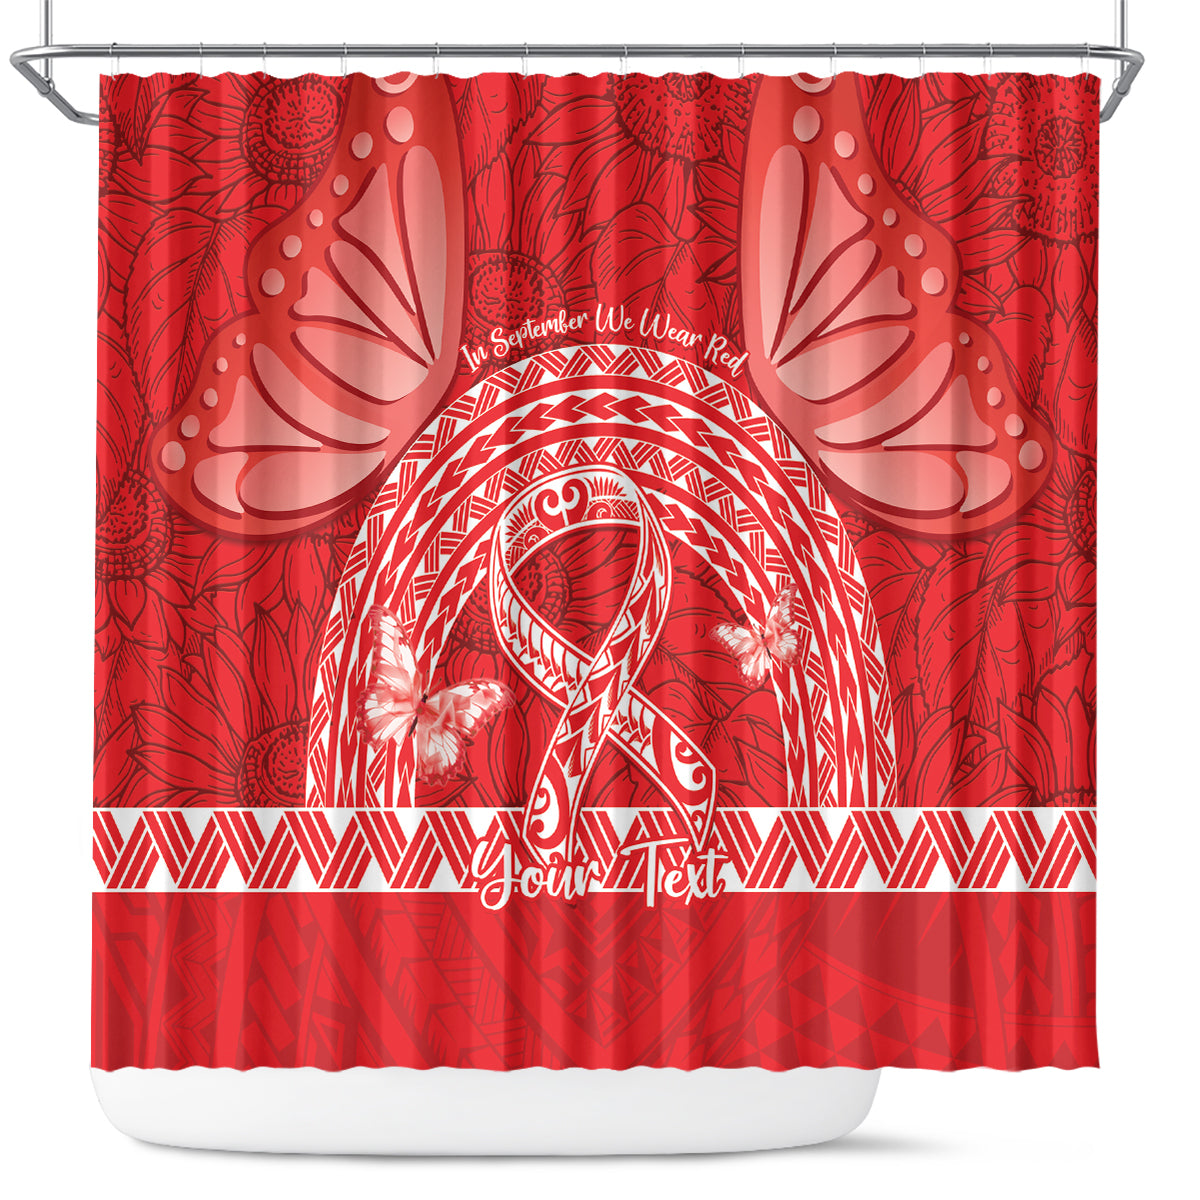 Personalised In September We Wear Red Shower Curtain Polynesia Blood Cancer Awareness